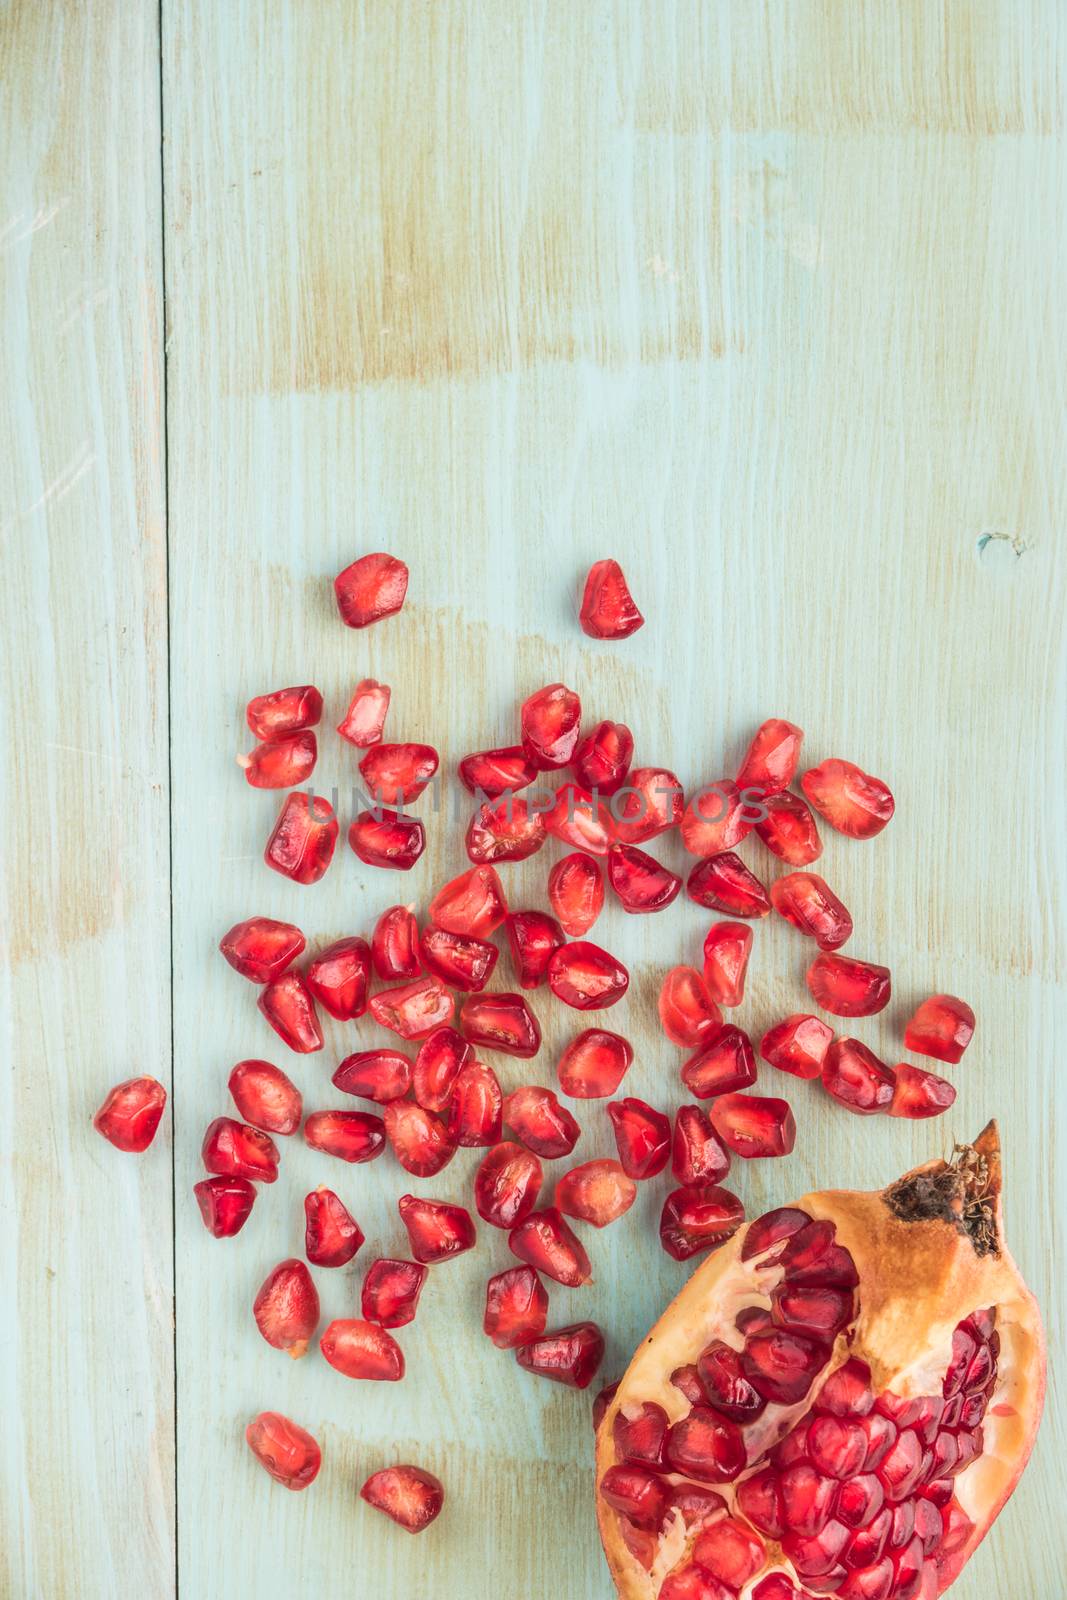 Pomegranate seeds over grunge wooden background by AnaMarques